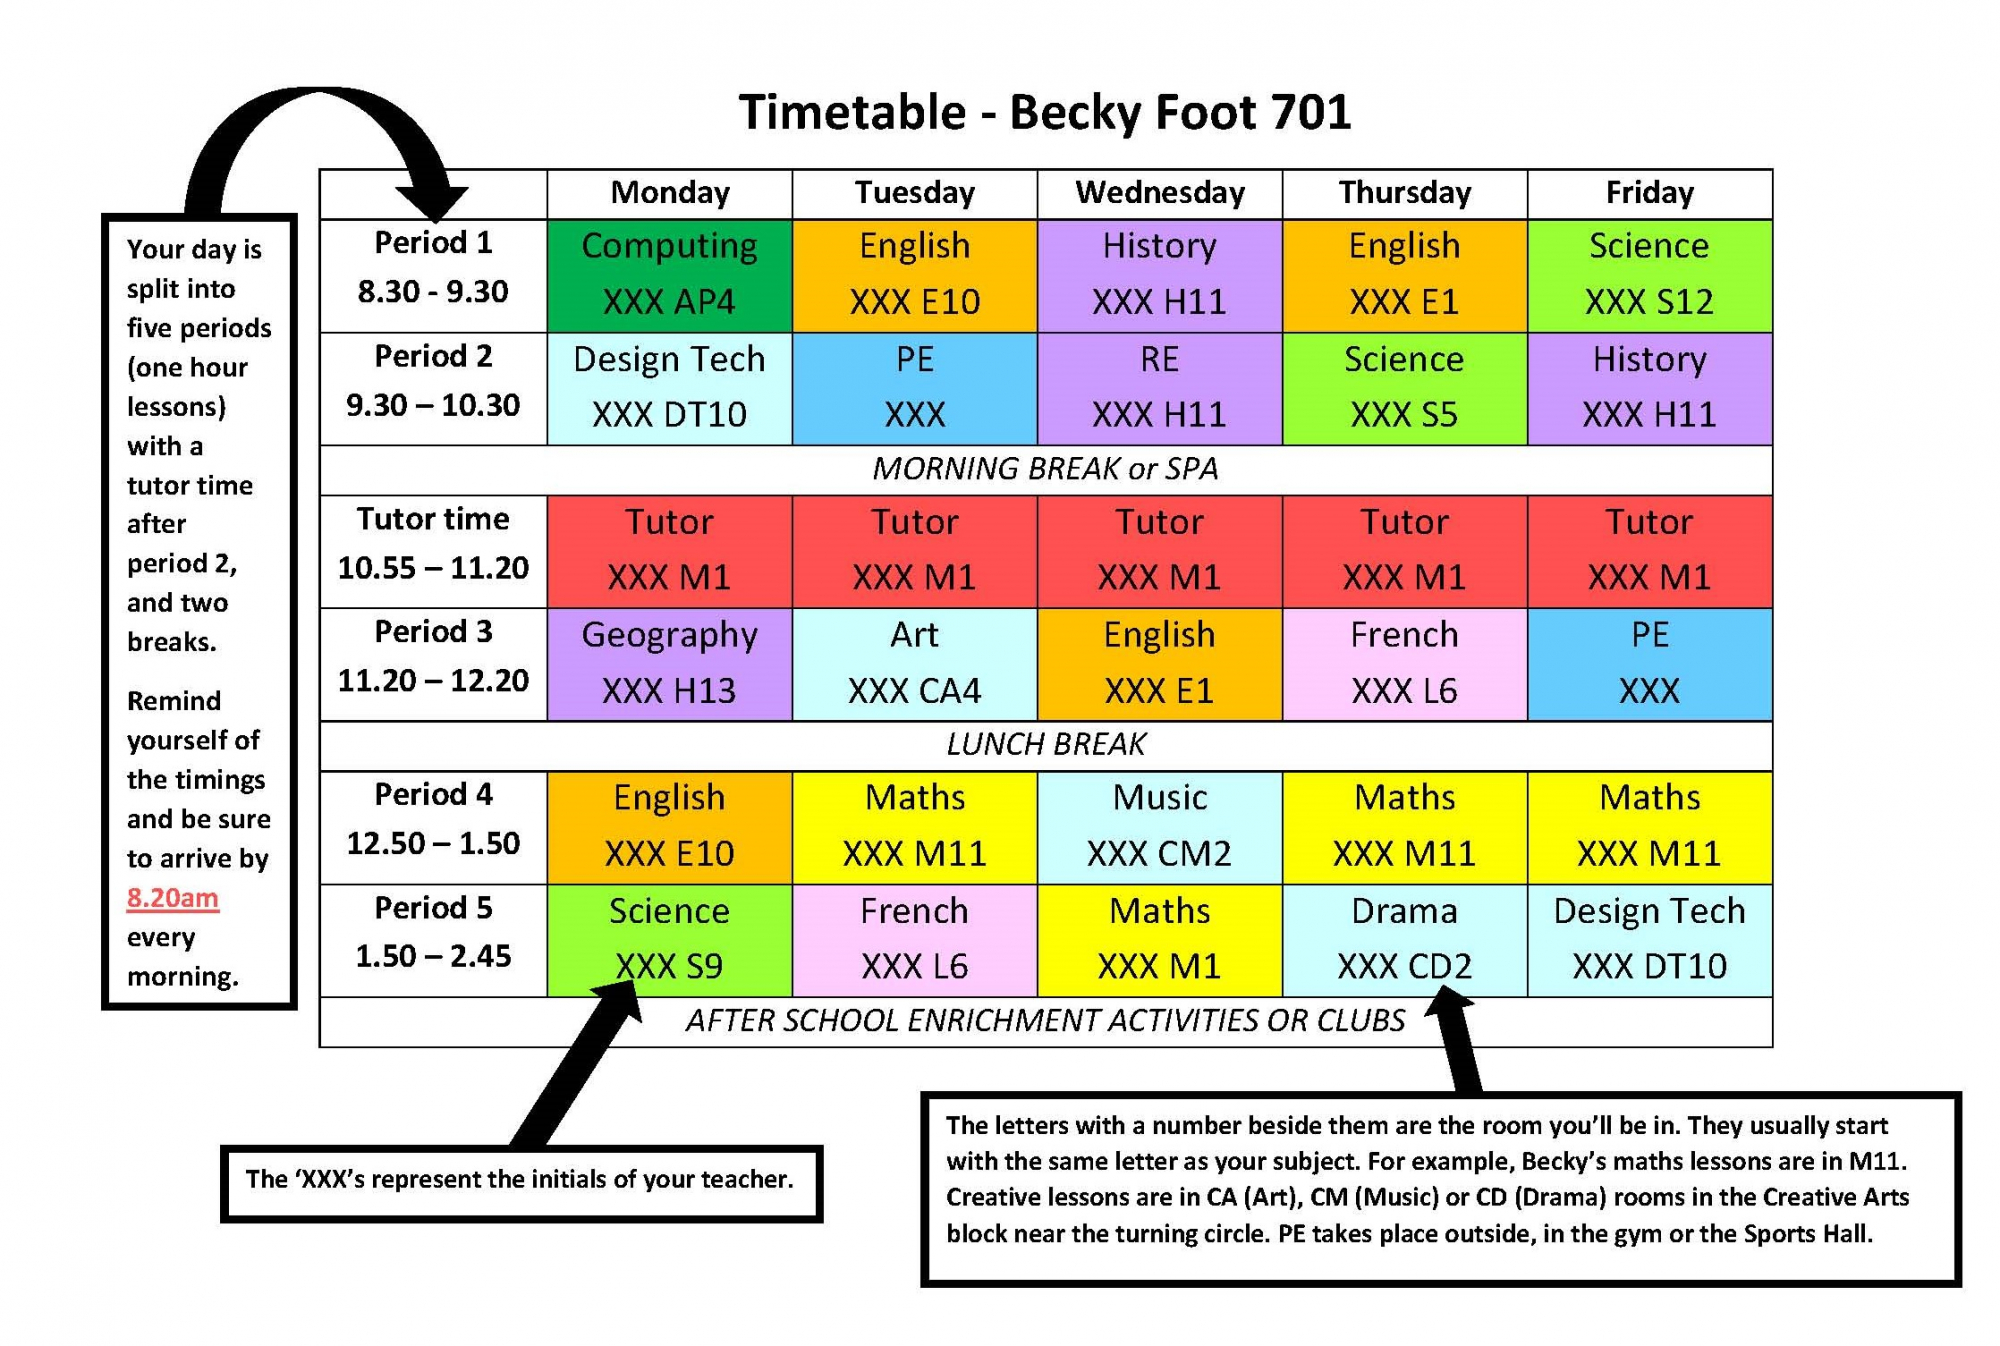 An example Year 7 timetable